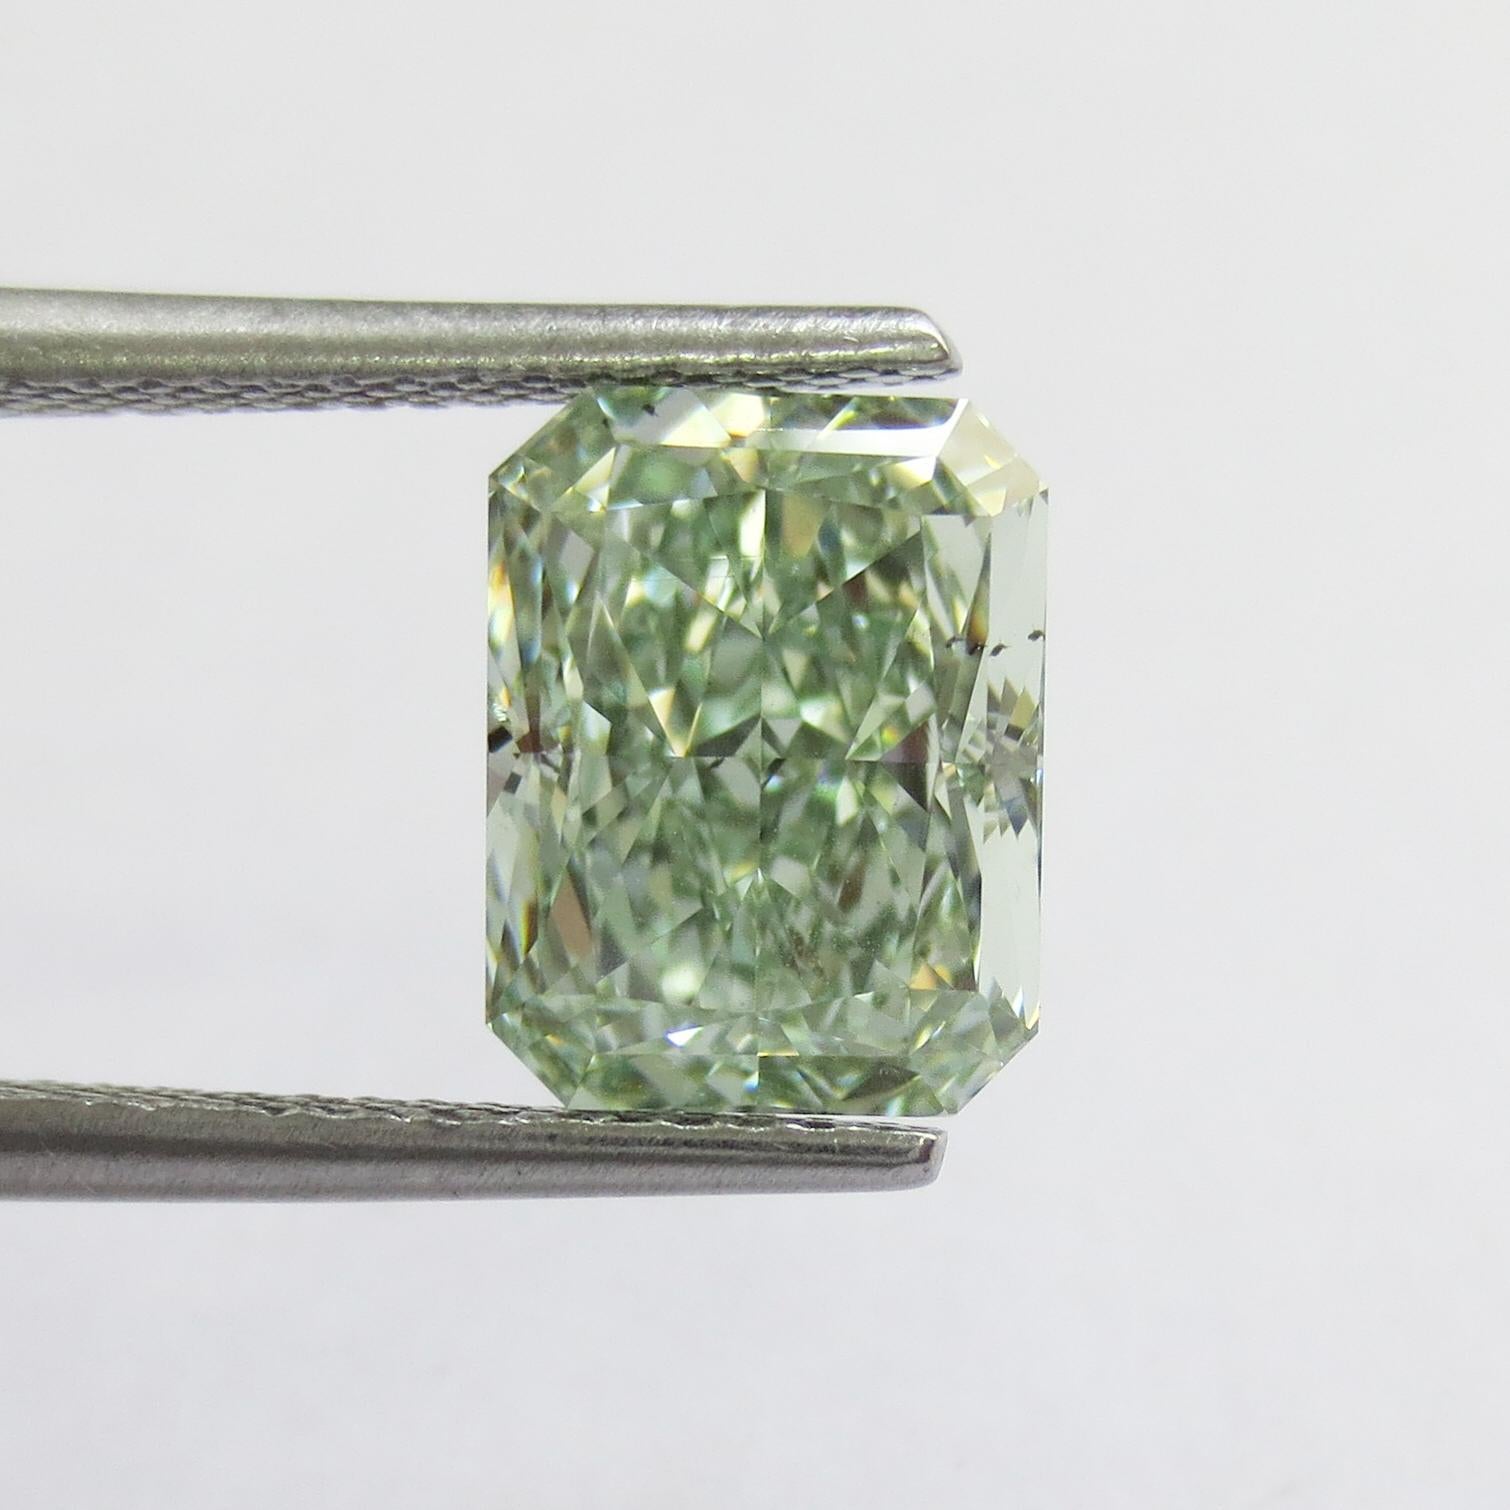 From the Emilio Jewelry Museum Vault, Showcasing a magnificent investment grade natural 3.00 carat fancy intense yellowish green diamond. Yellowish means the overtone is very slight and 90% green. 
We are experts at creating jewels for these very